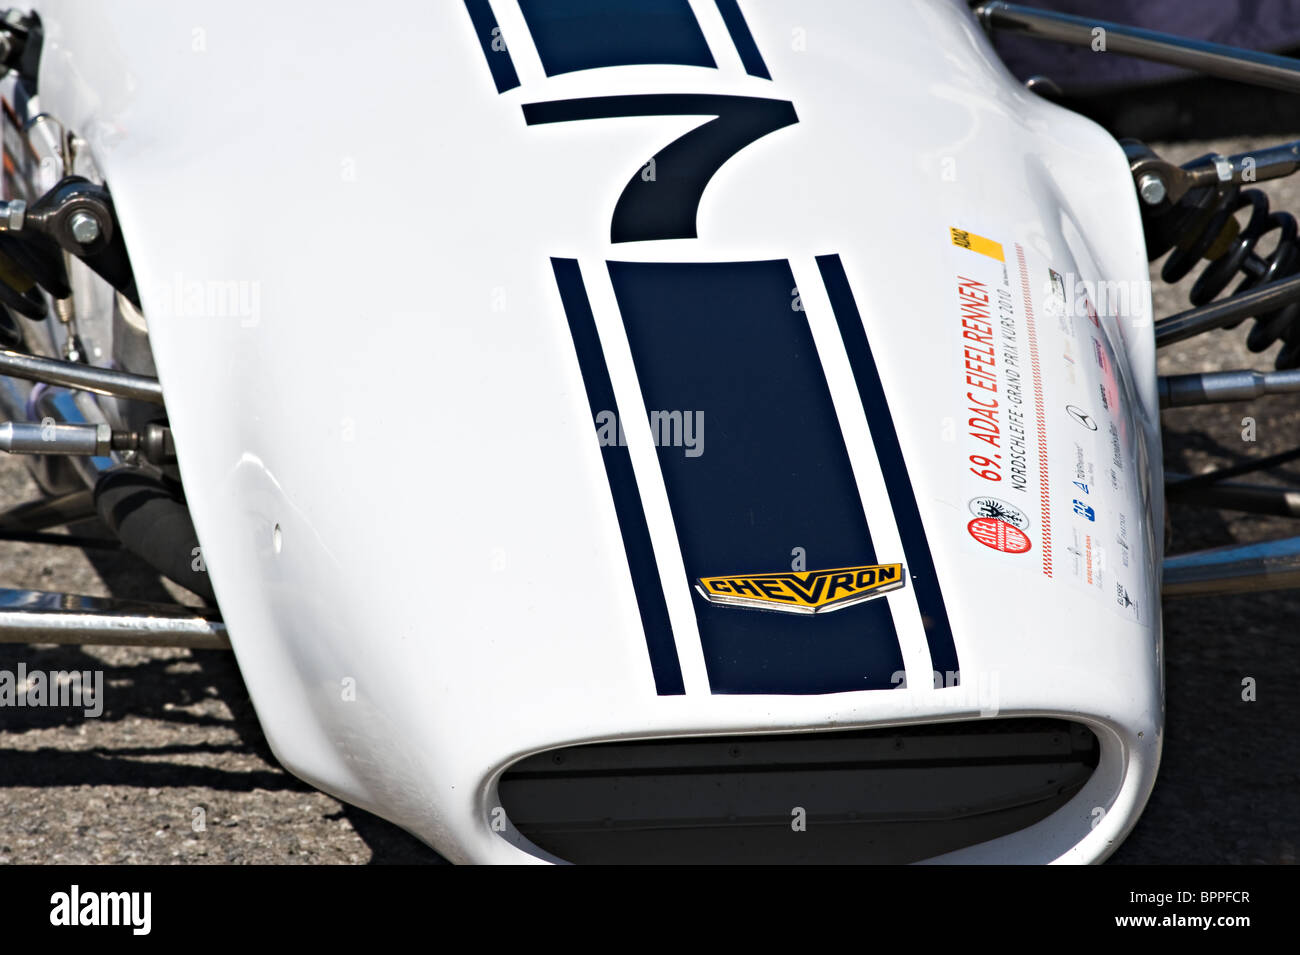 Nose Section of a Chevron B15C Racing Car in Paddock at Oulton Park Motor Race Circuit Cheshire England United Kingdom UK Stock Photo